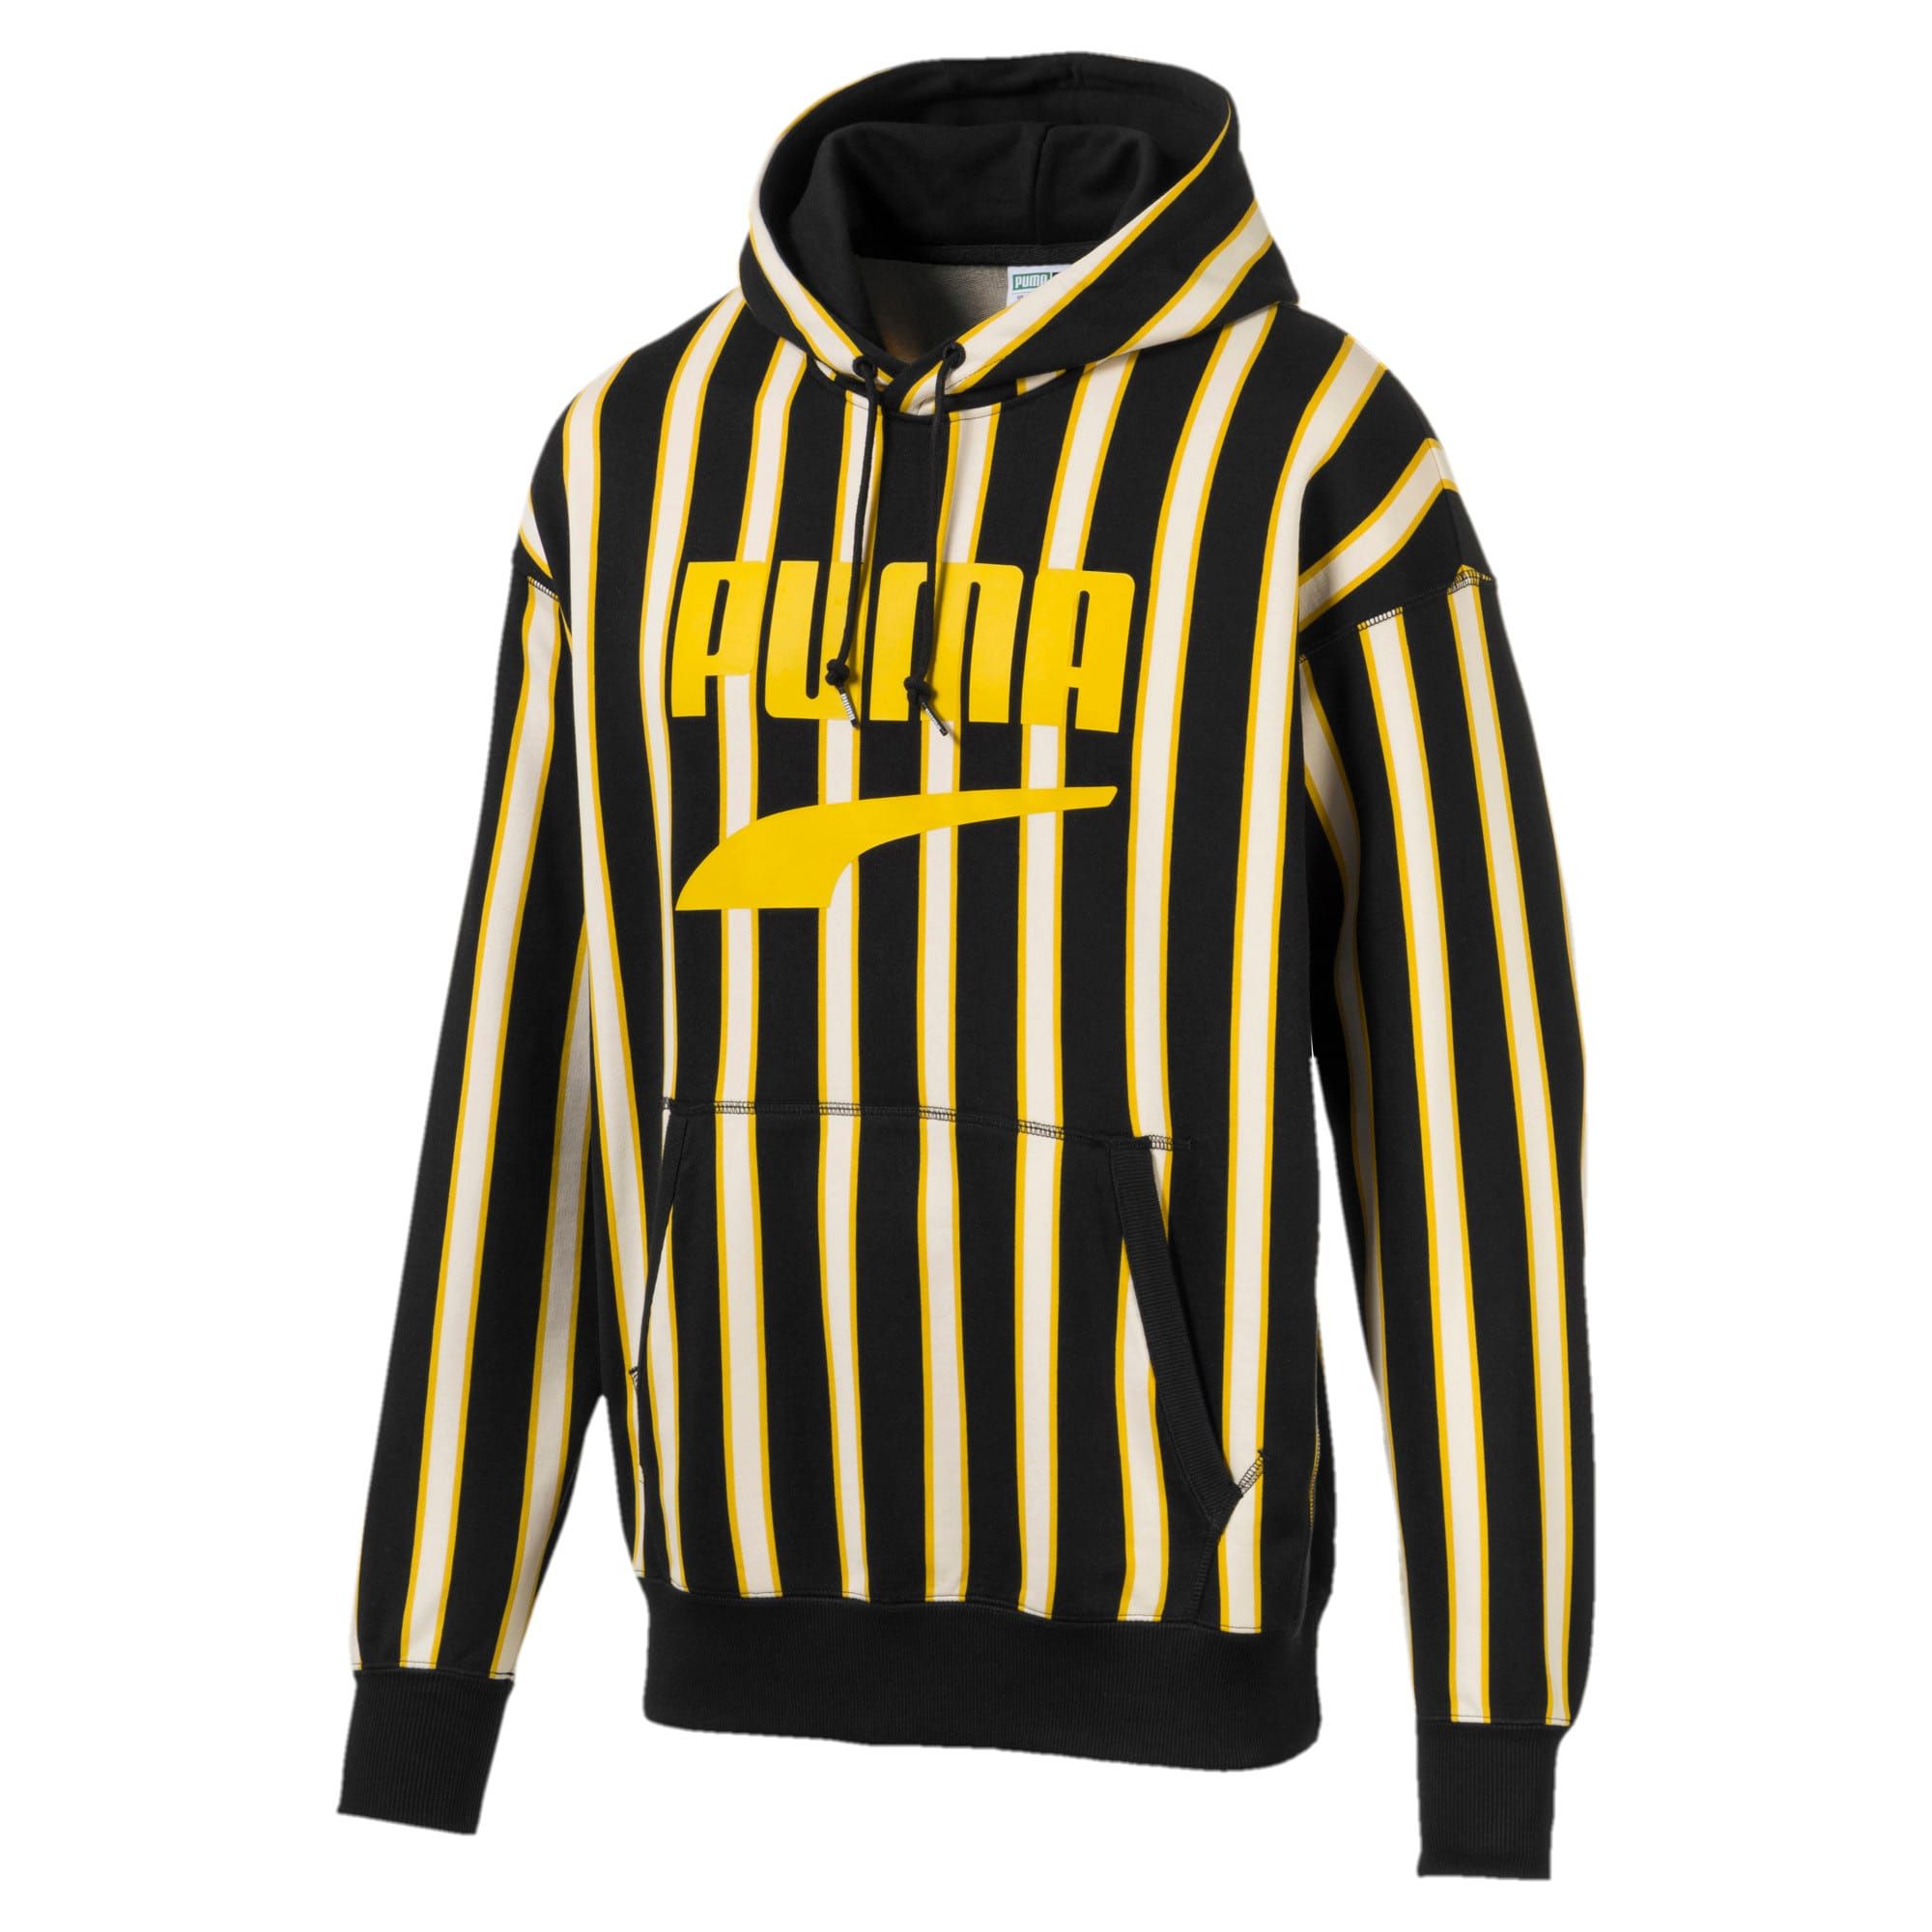 PUMA Downtown Po Graphic Men's Hoodie in Black/AOP size X Small